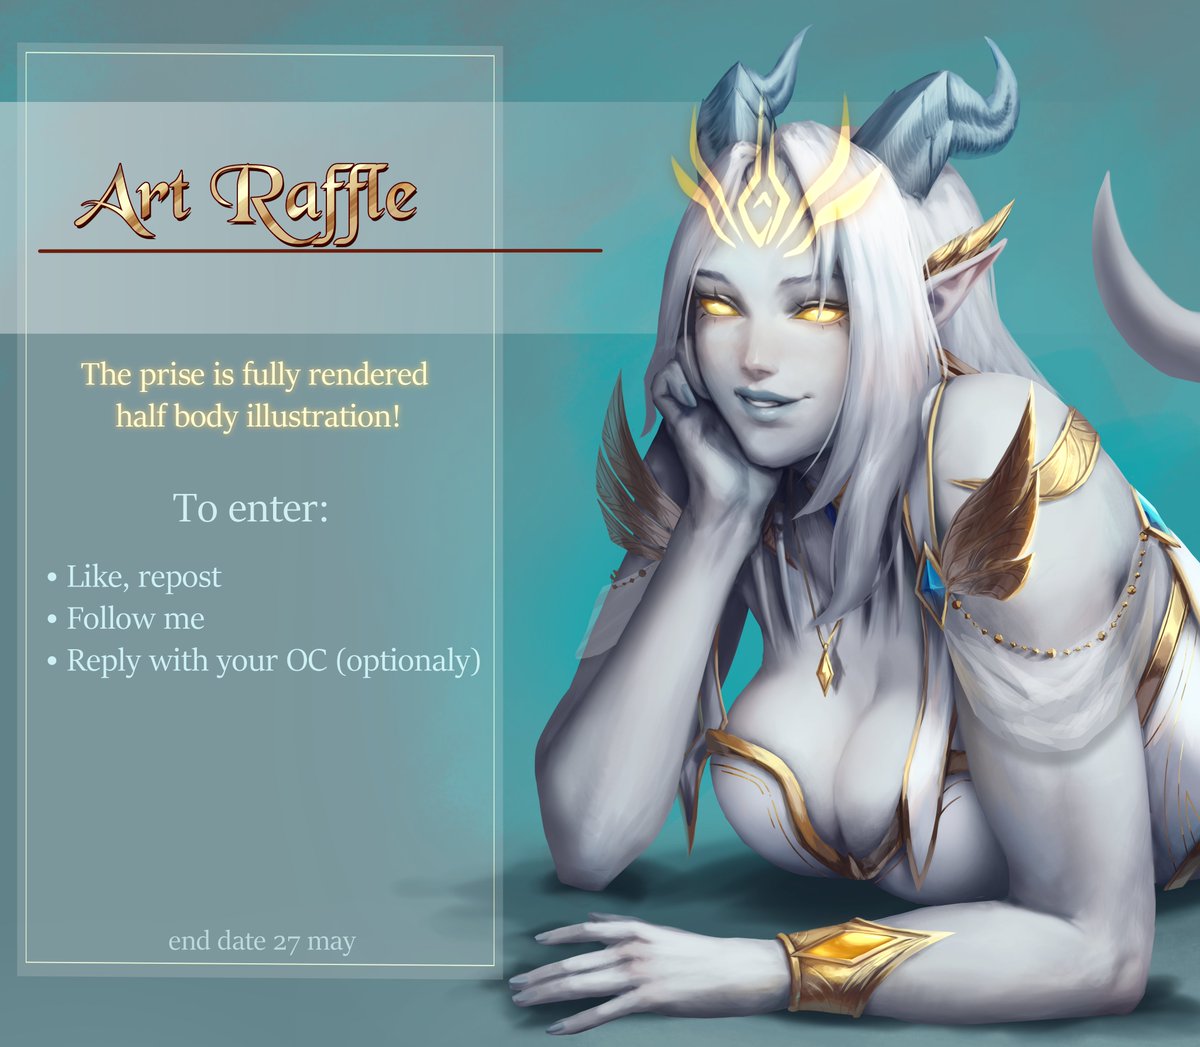 Art raffle as 5000 followers celebration! 🥳

The prise is free commission: Fully rendered half body illustration with simple background! 

End date 27 may ✨